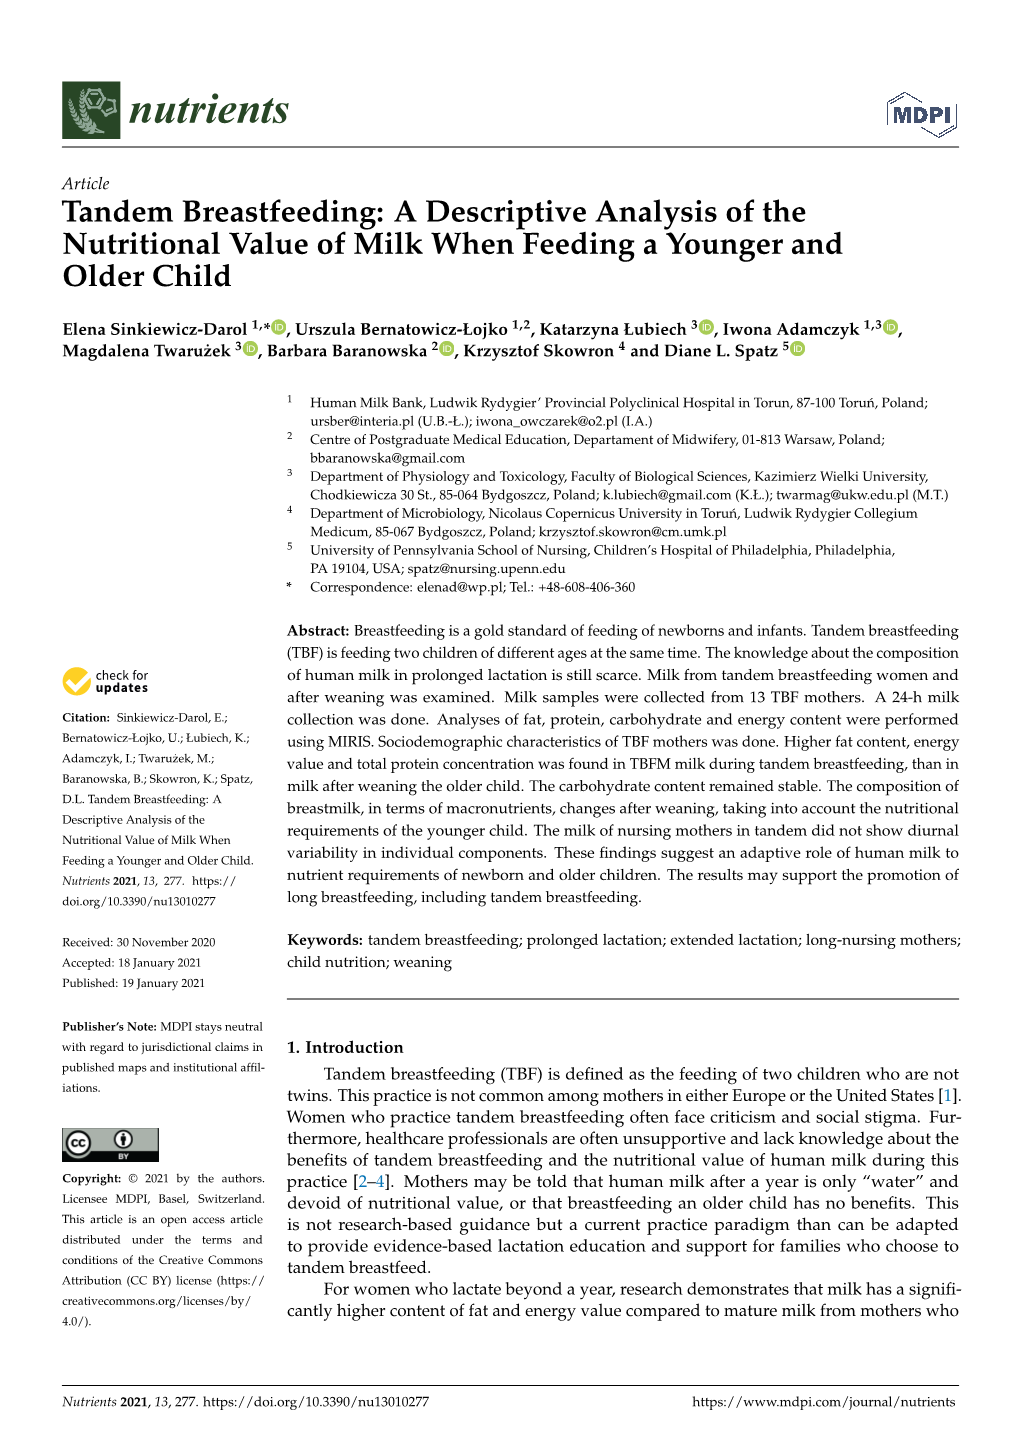 Tandem Breastfeeding: a Descriptive Analysis of the Nutritional Value of Milk When Feeding a Younger and Older Child